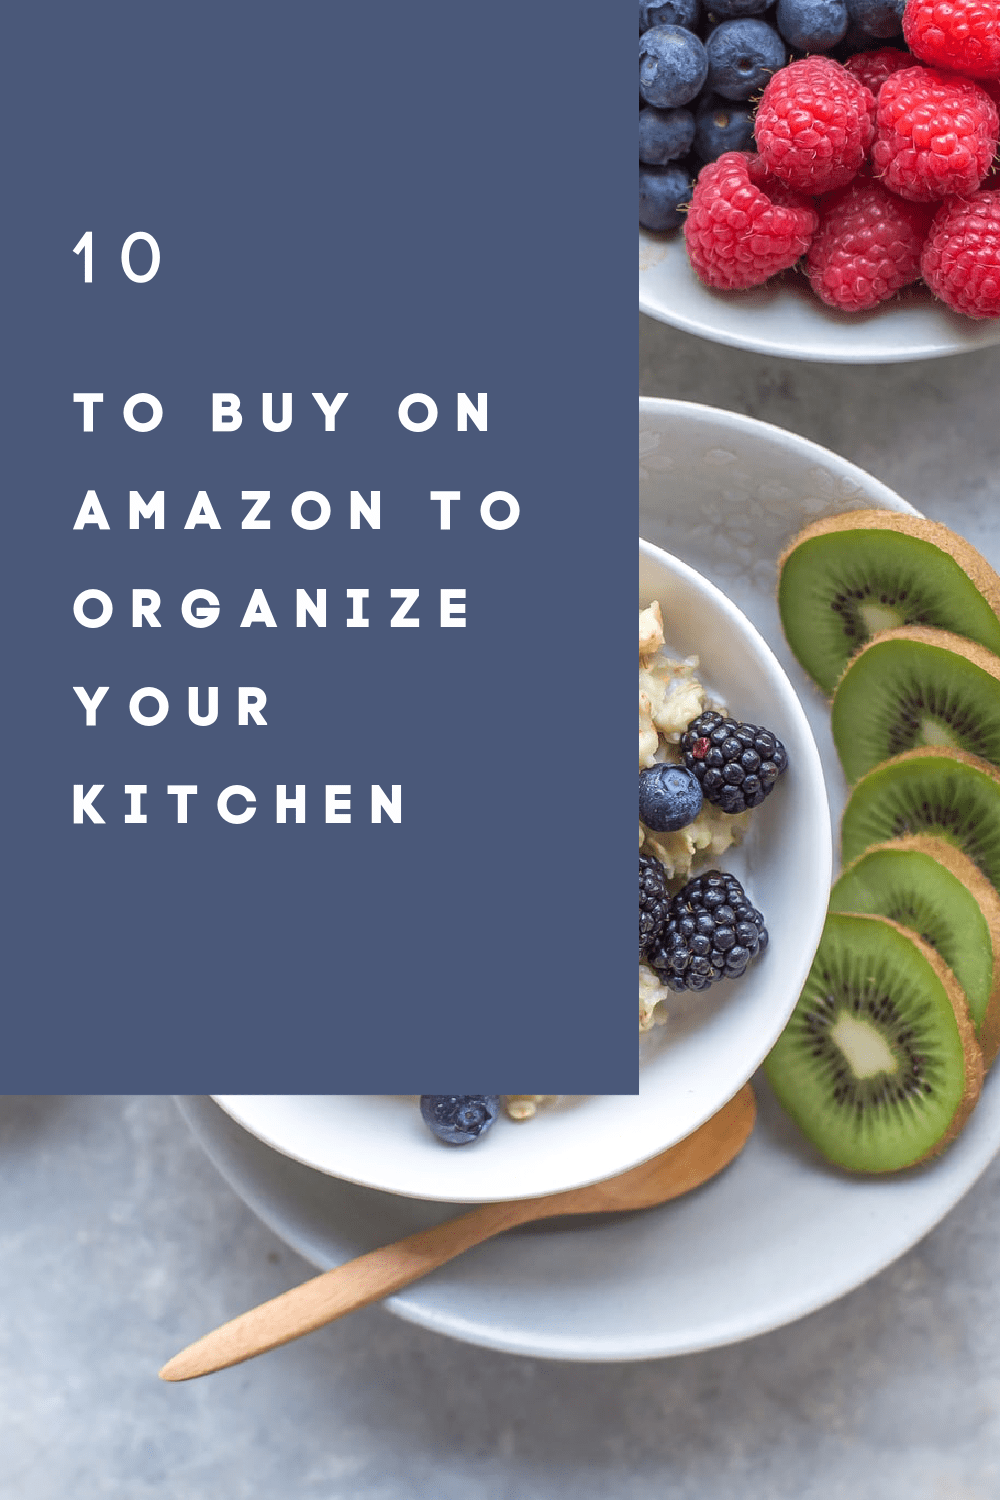 To Buy On Amazon 10 Things To Organize Your Kitchen. This will create more space and organization. Lets declutter the kitchen to make life happier. Happy Organizing! www.ChopHappy.com #clutter #organization